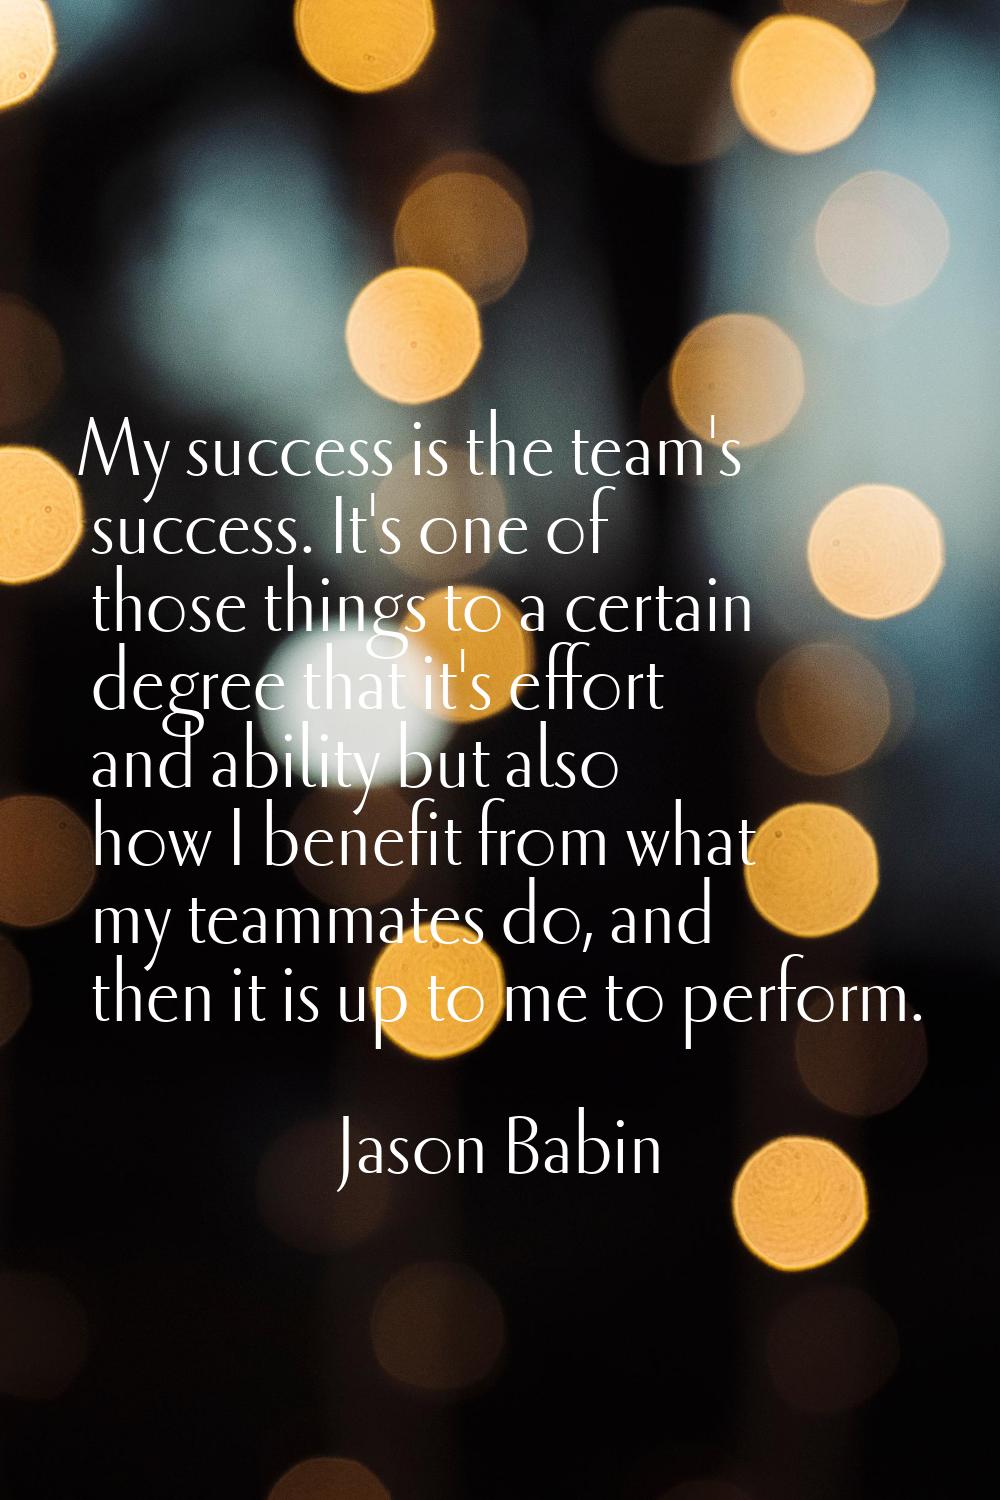 My success is the team's success. It's one of those things to a certain degree that it's effort and